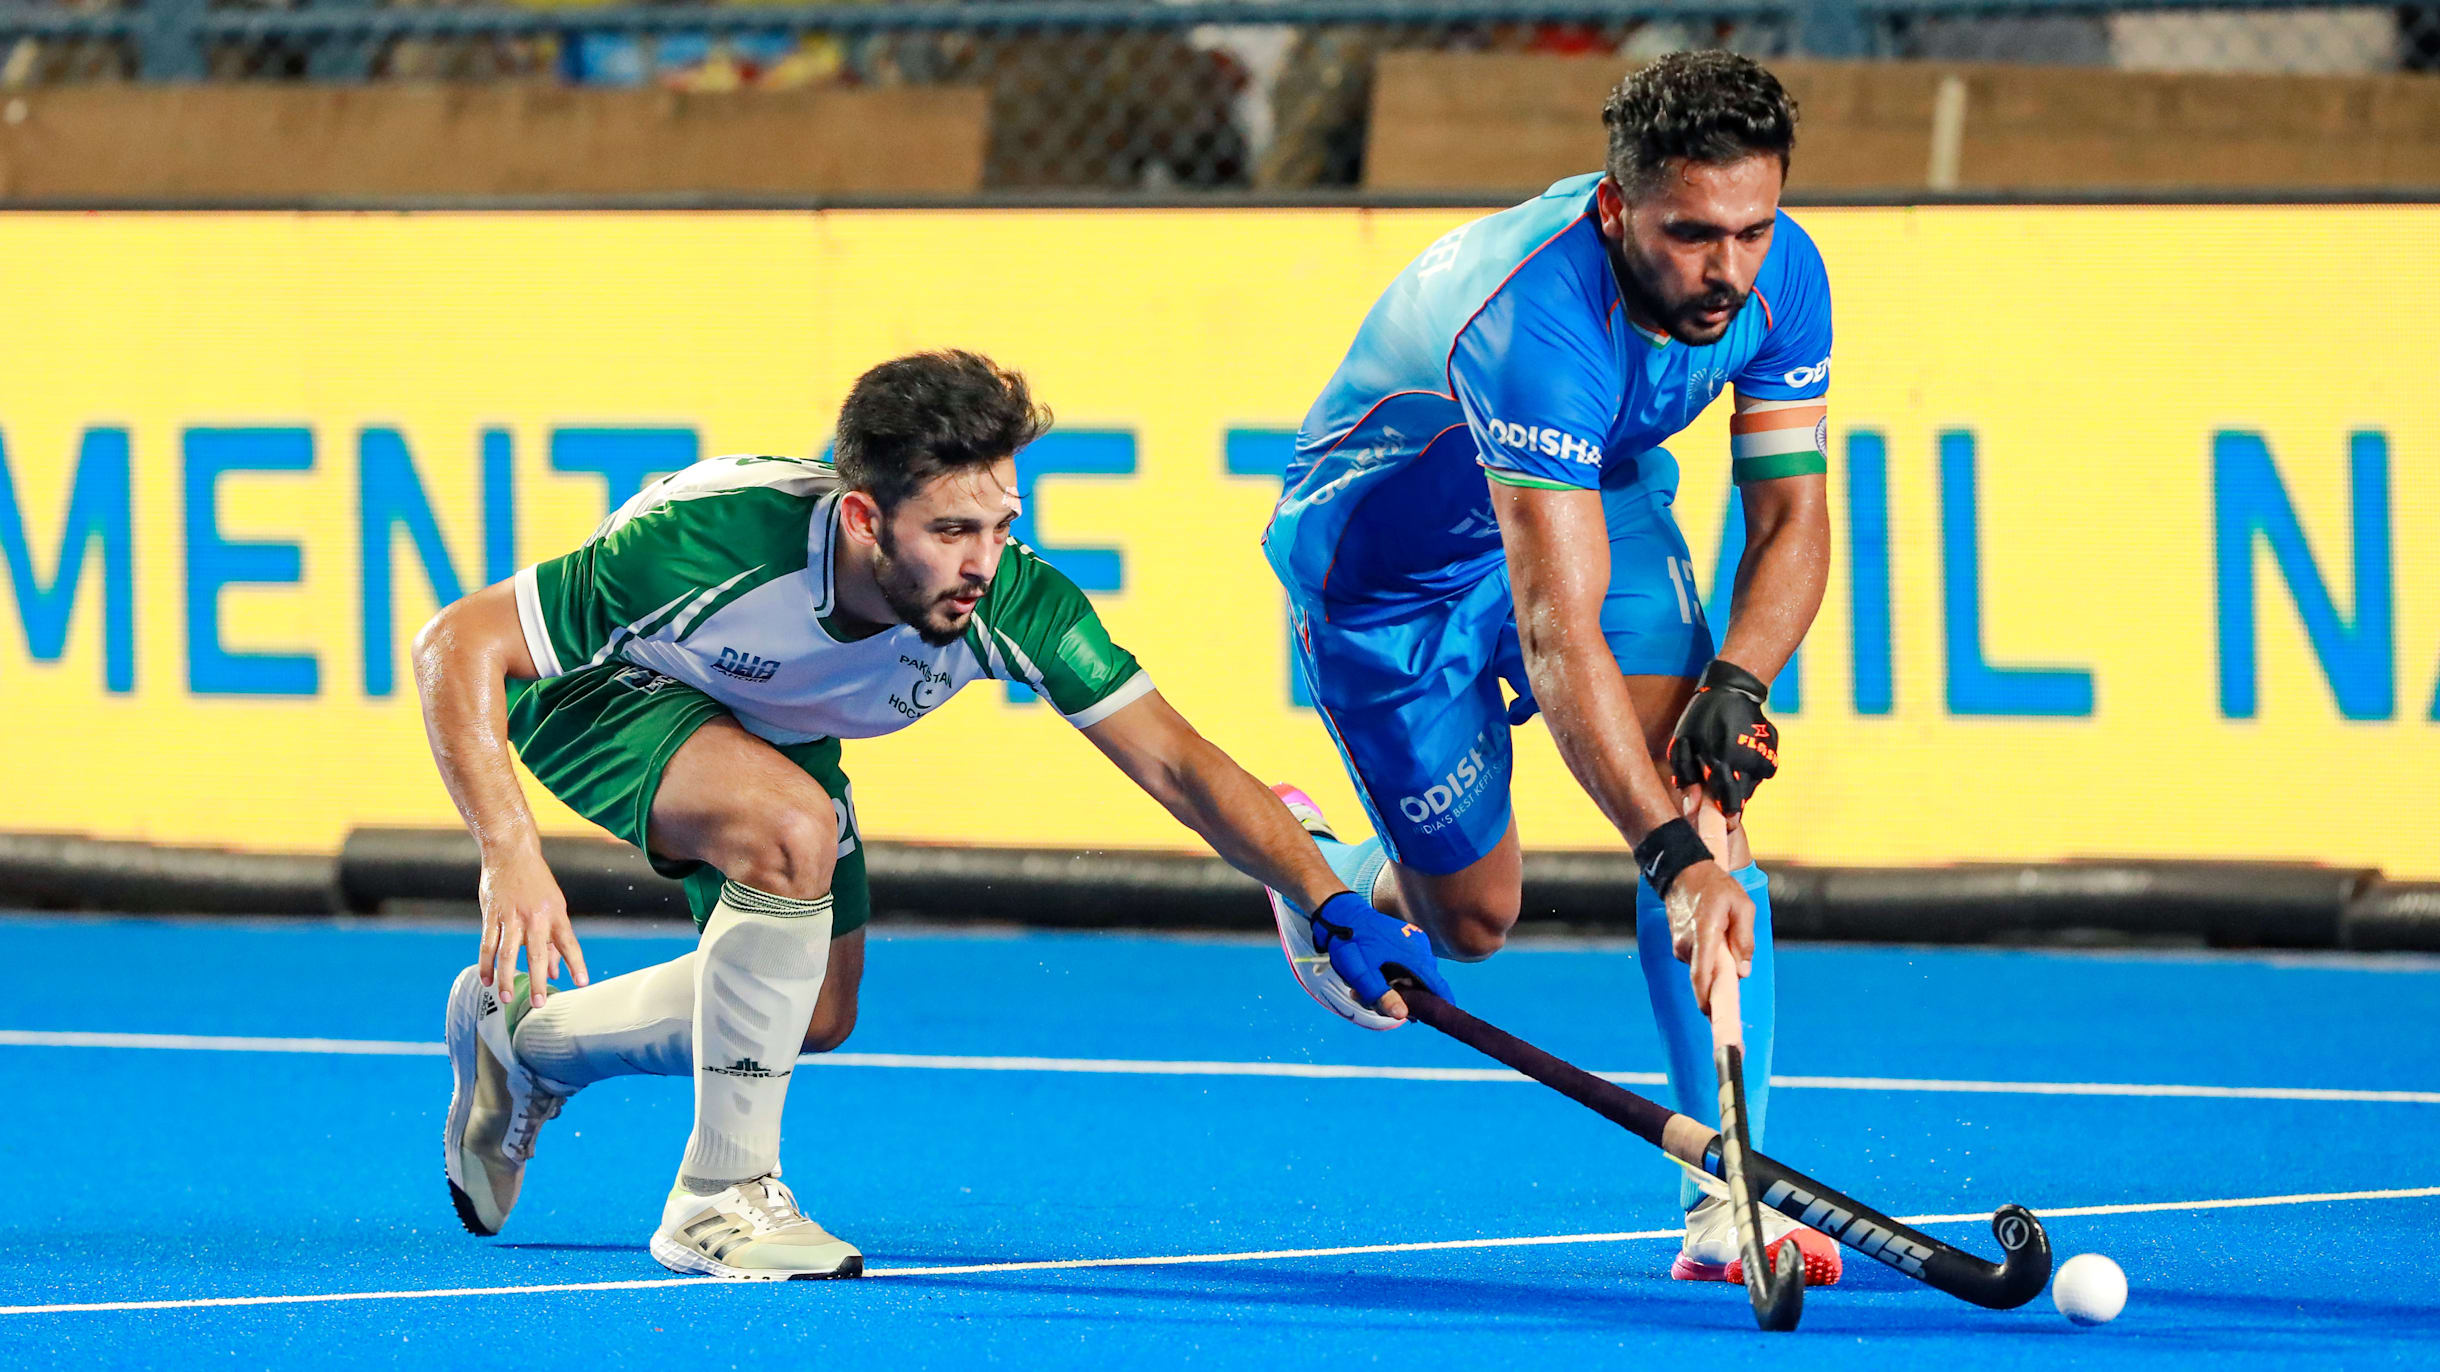 hockey match today live streaming free